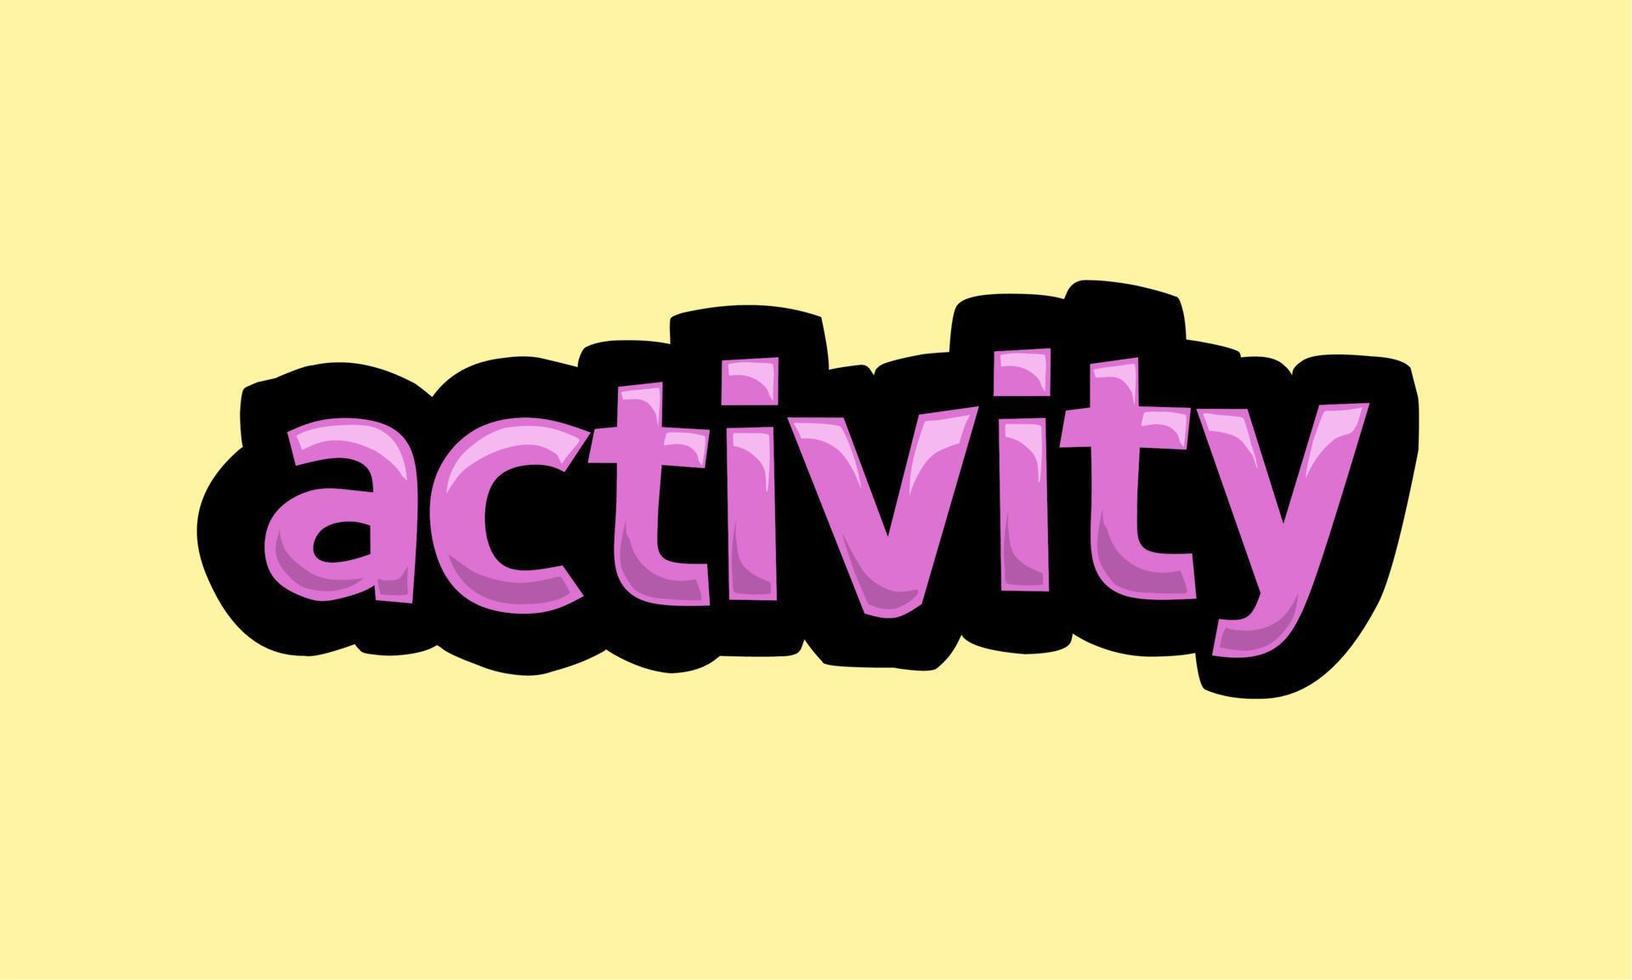 ACTIVITY writing vector design on a yellow background